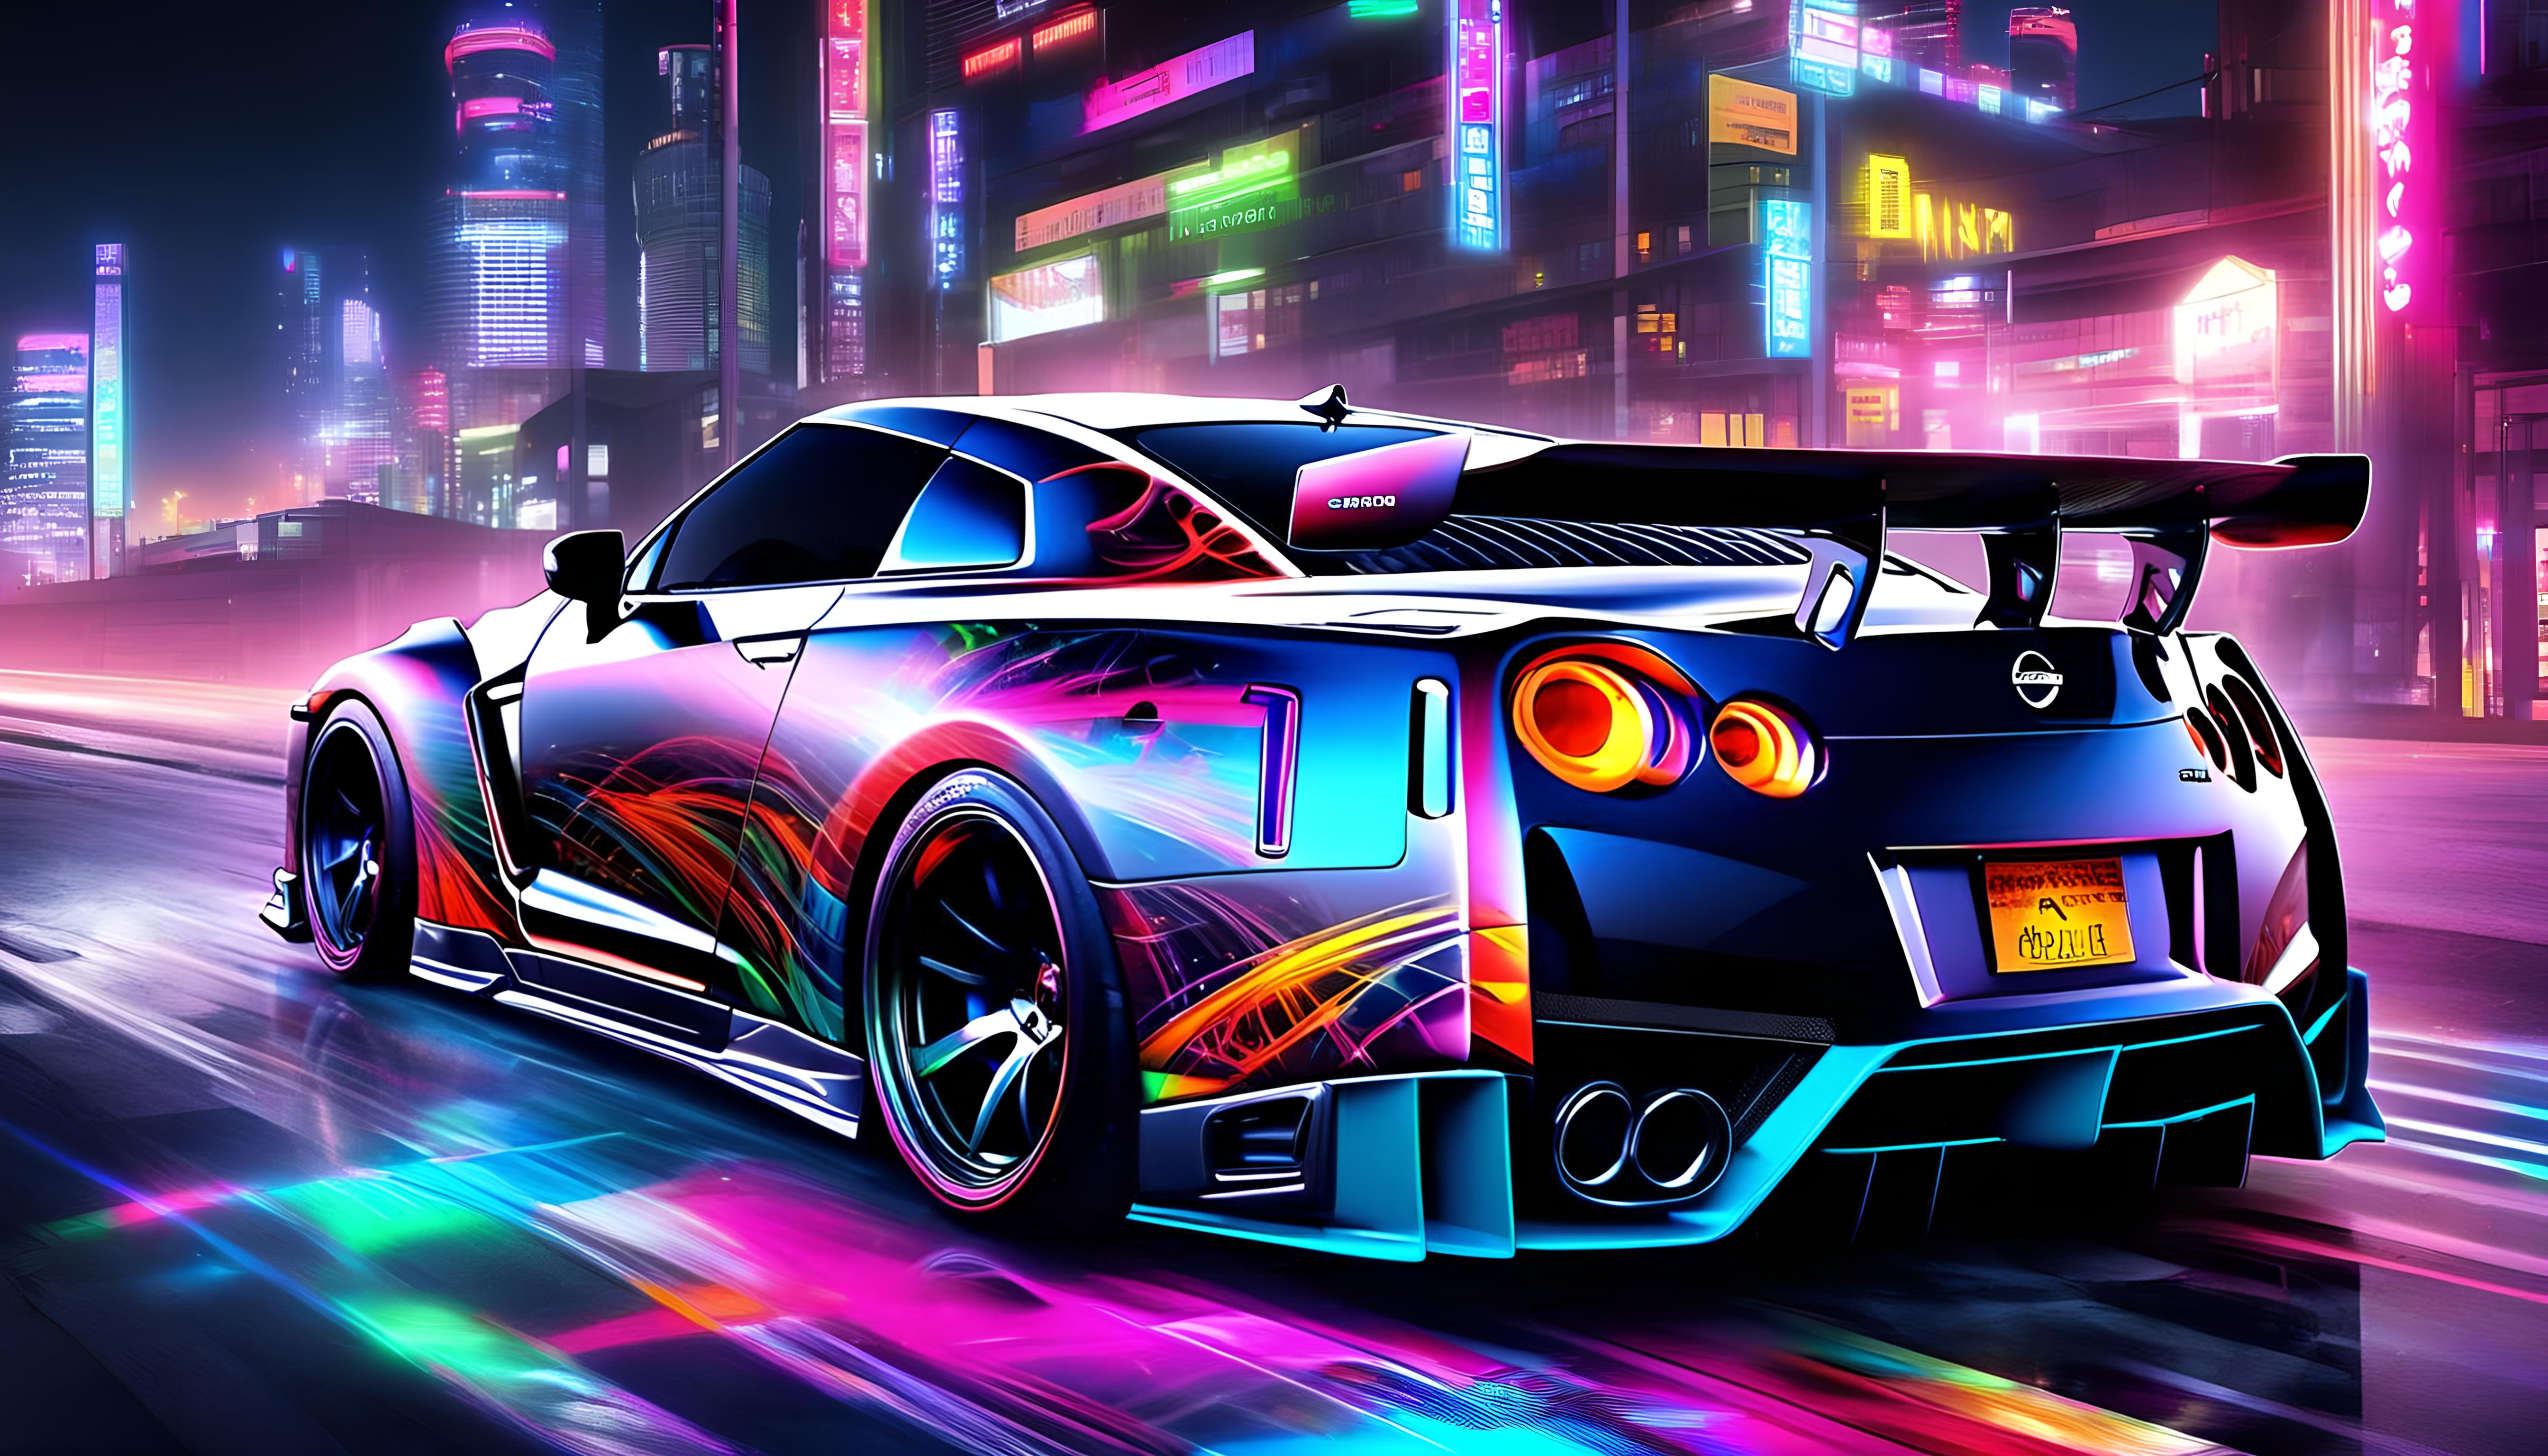 780+ Car HD Wallpapers and Backgrounds